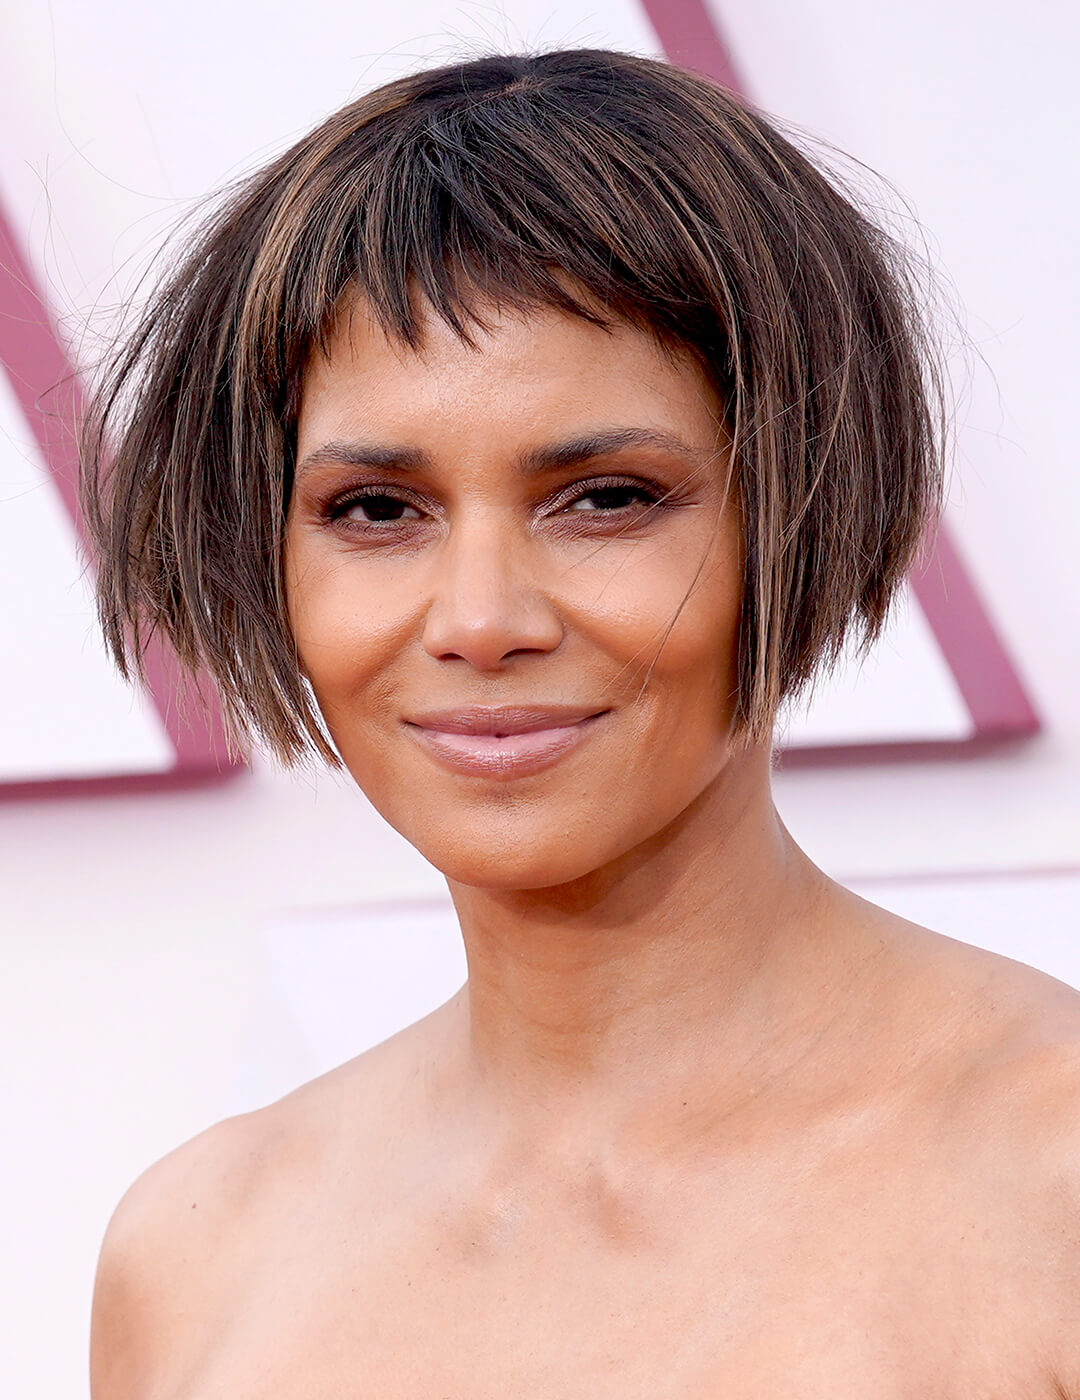 Halle Berry rocking a micro bob hairstyle and neutral makeup look